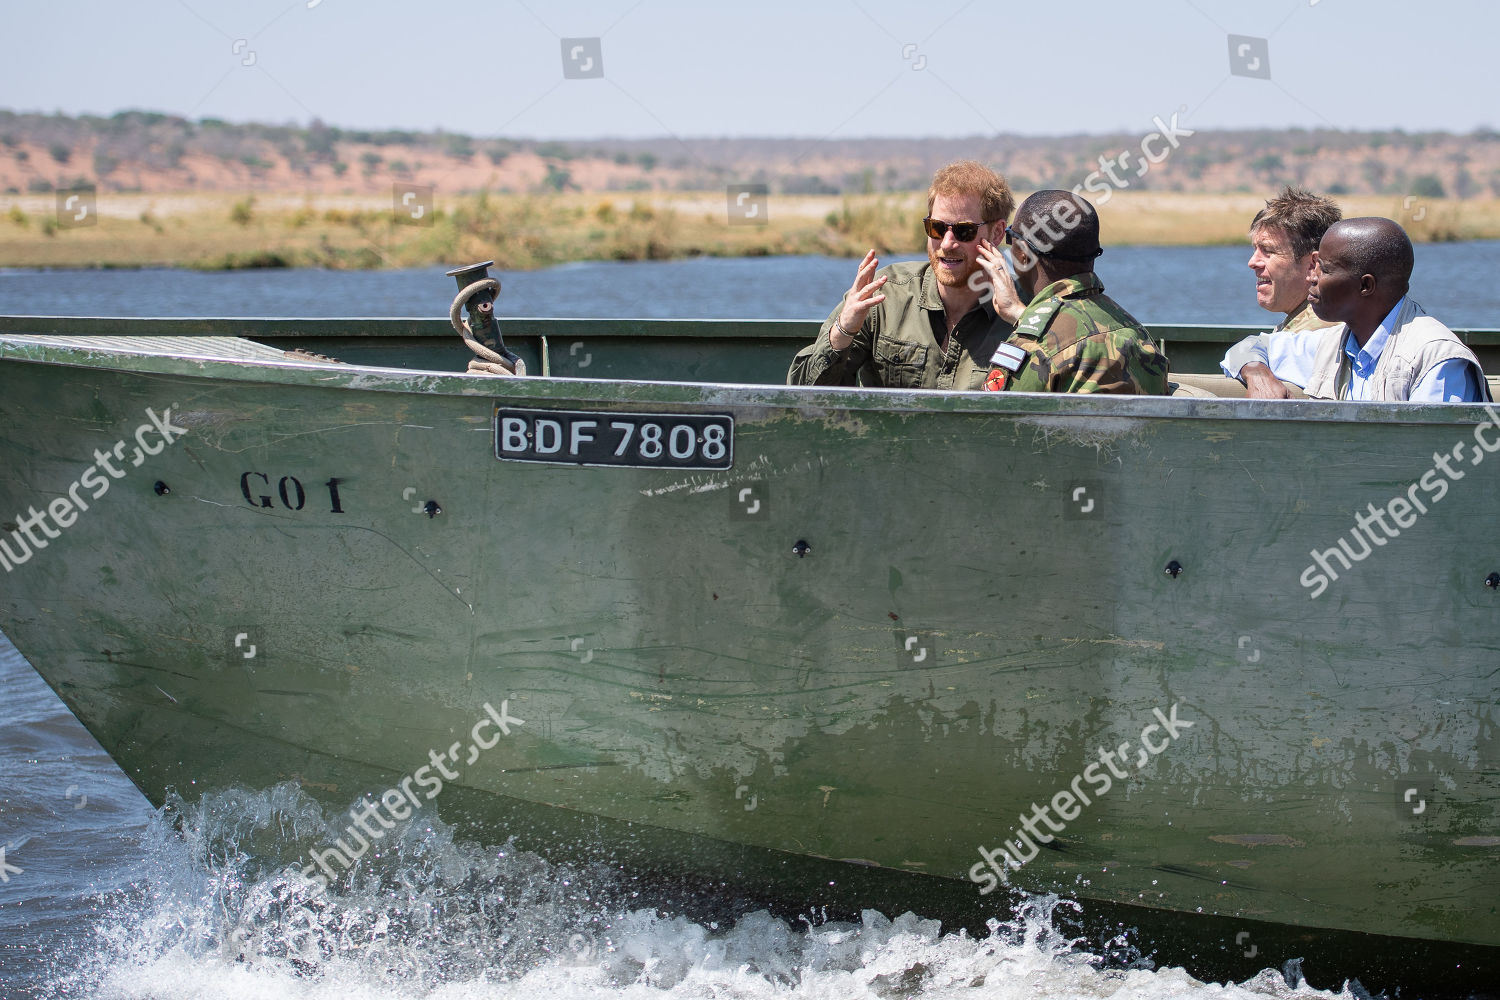 prince-harry-visit-to-africa-shutterstock-editorial-10424667l.jpg